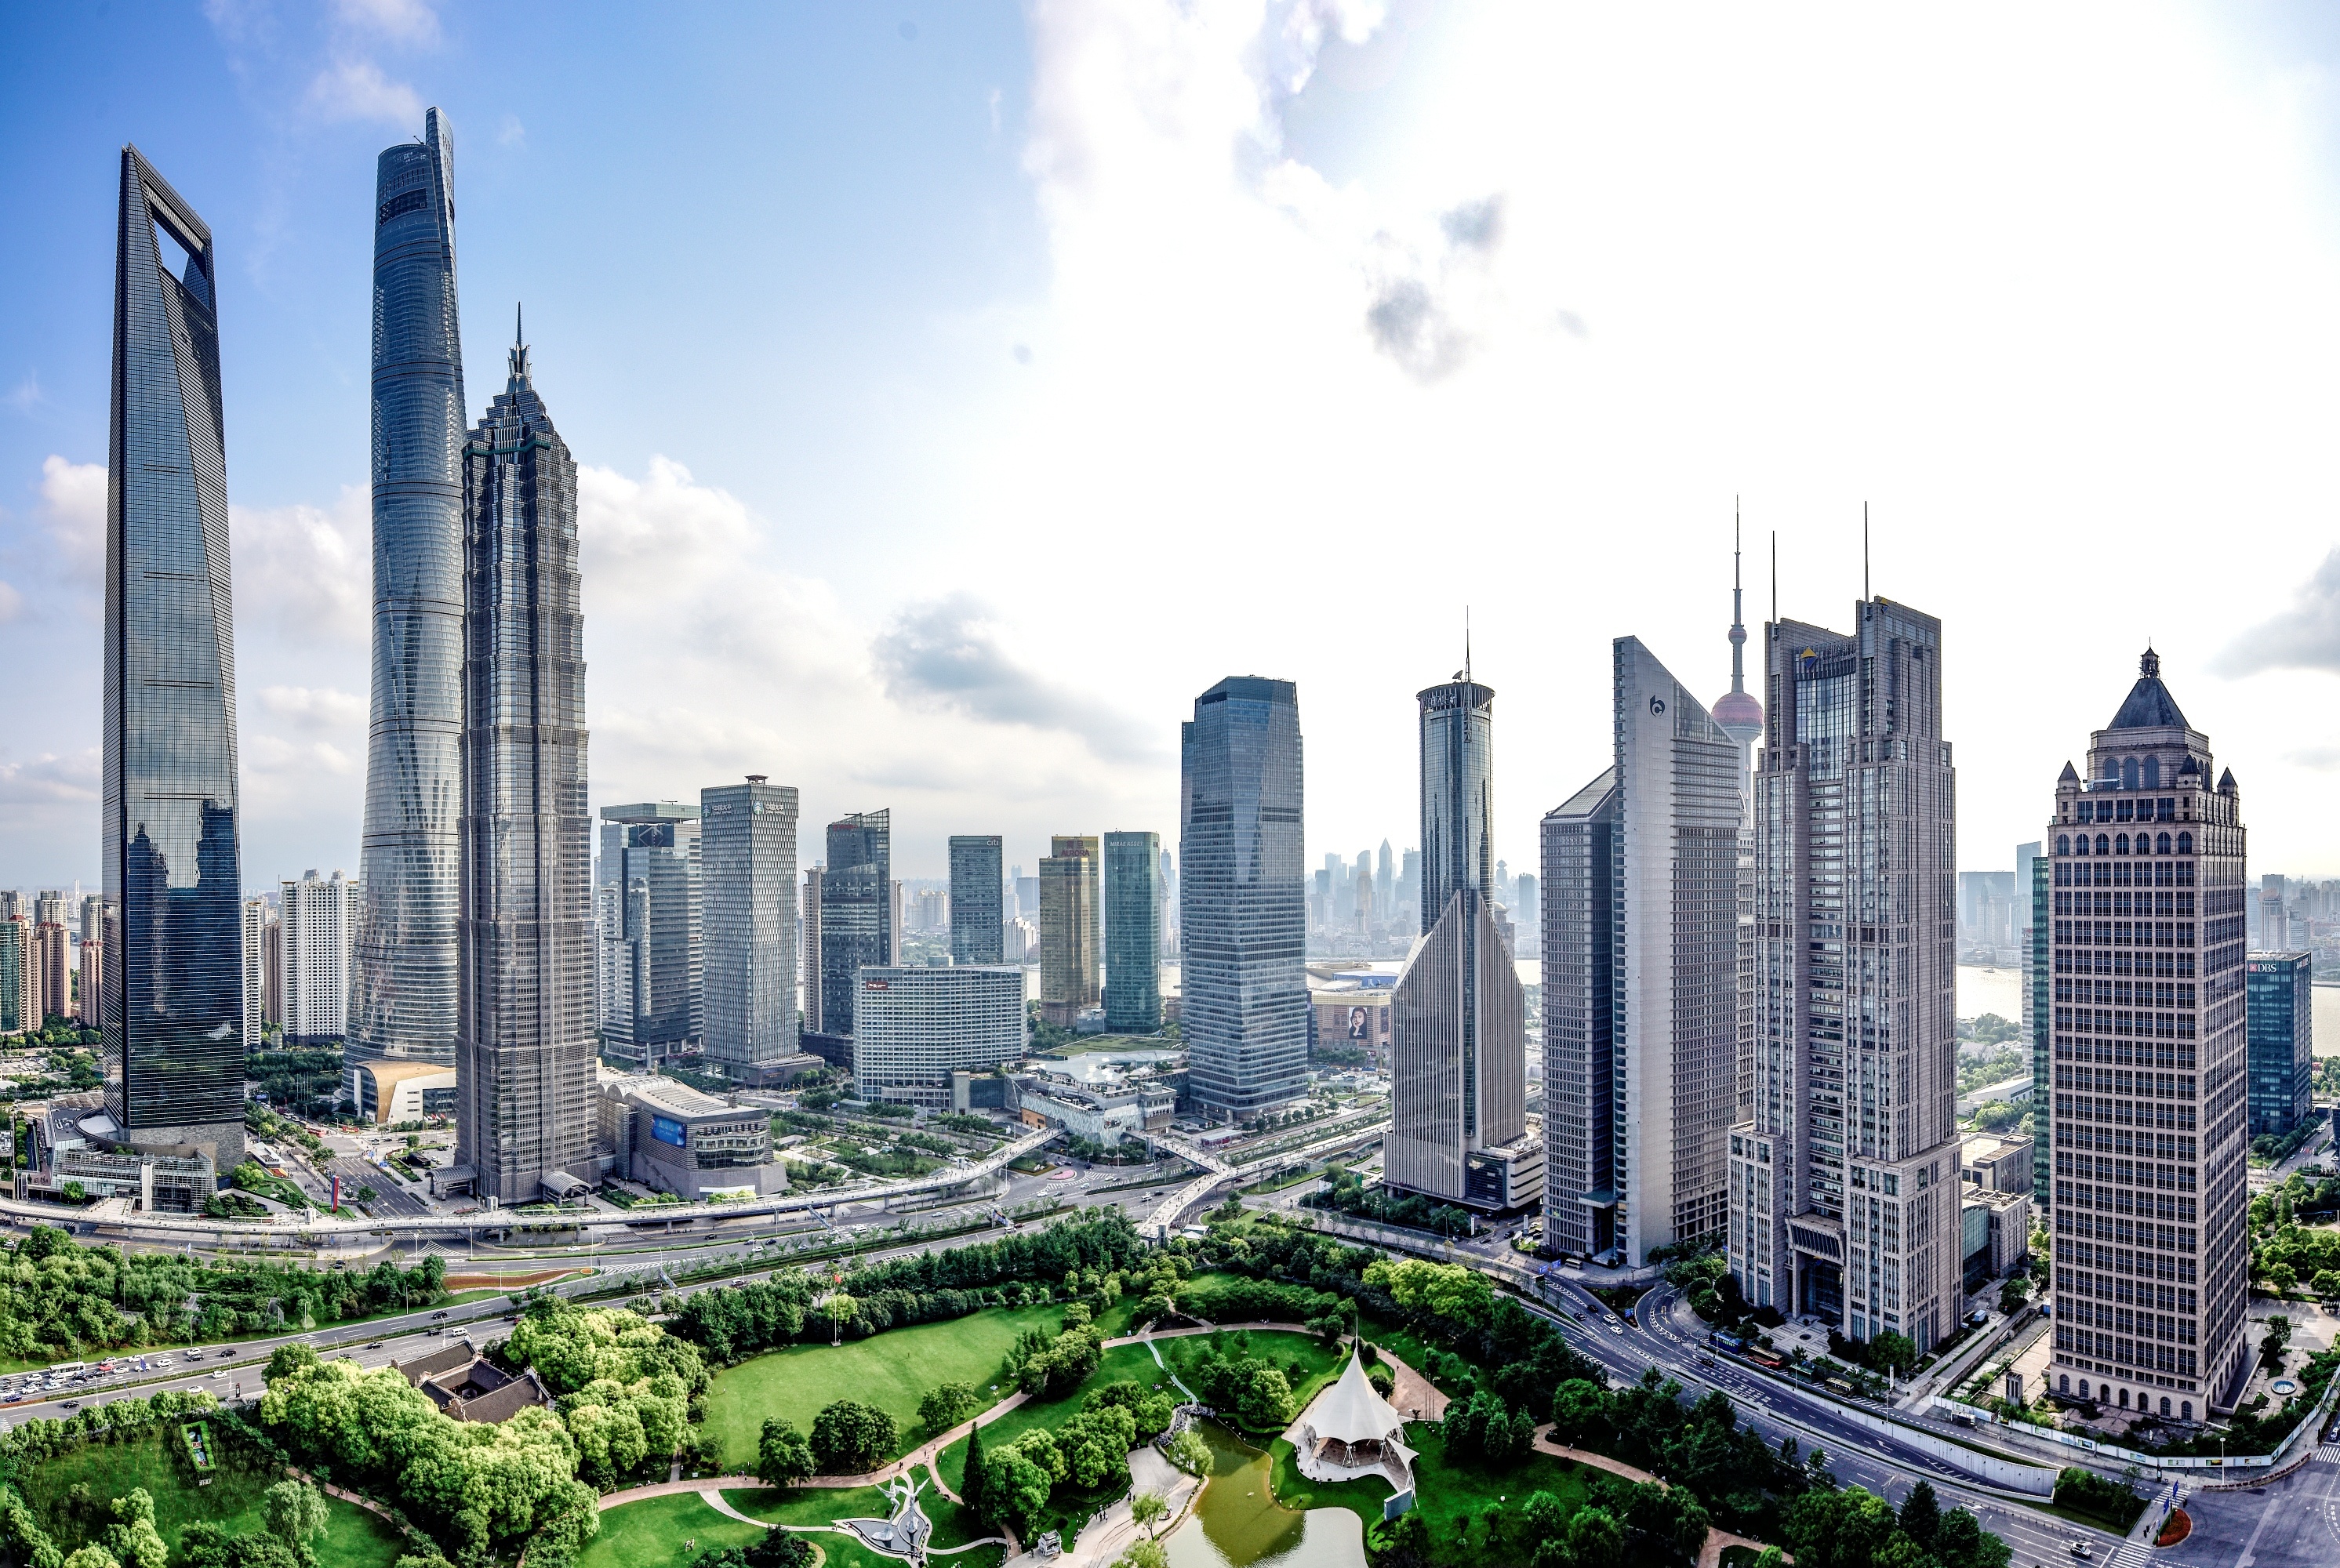 Jin Mao Tower, SWFC architecture, Must-see attractions, Nearby landmarks, 2990x2000 HD Desktop